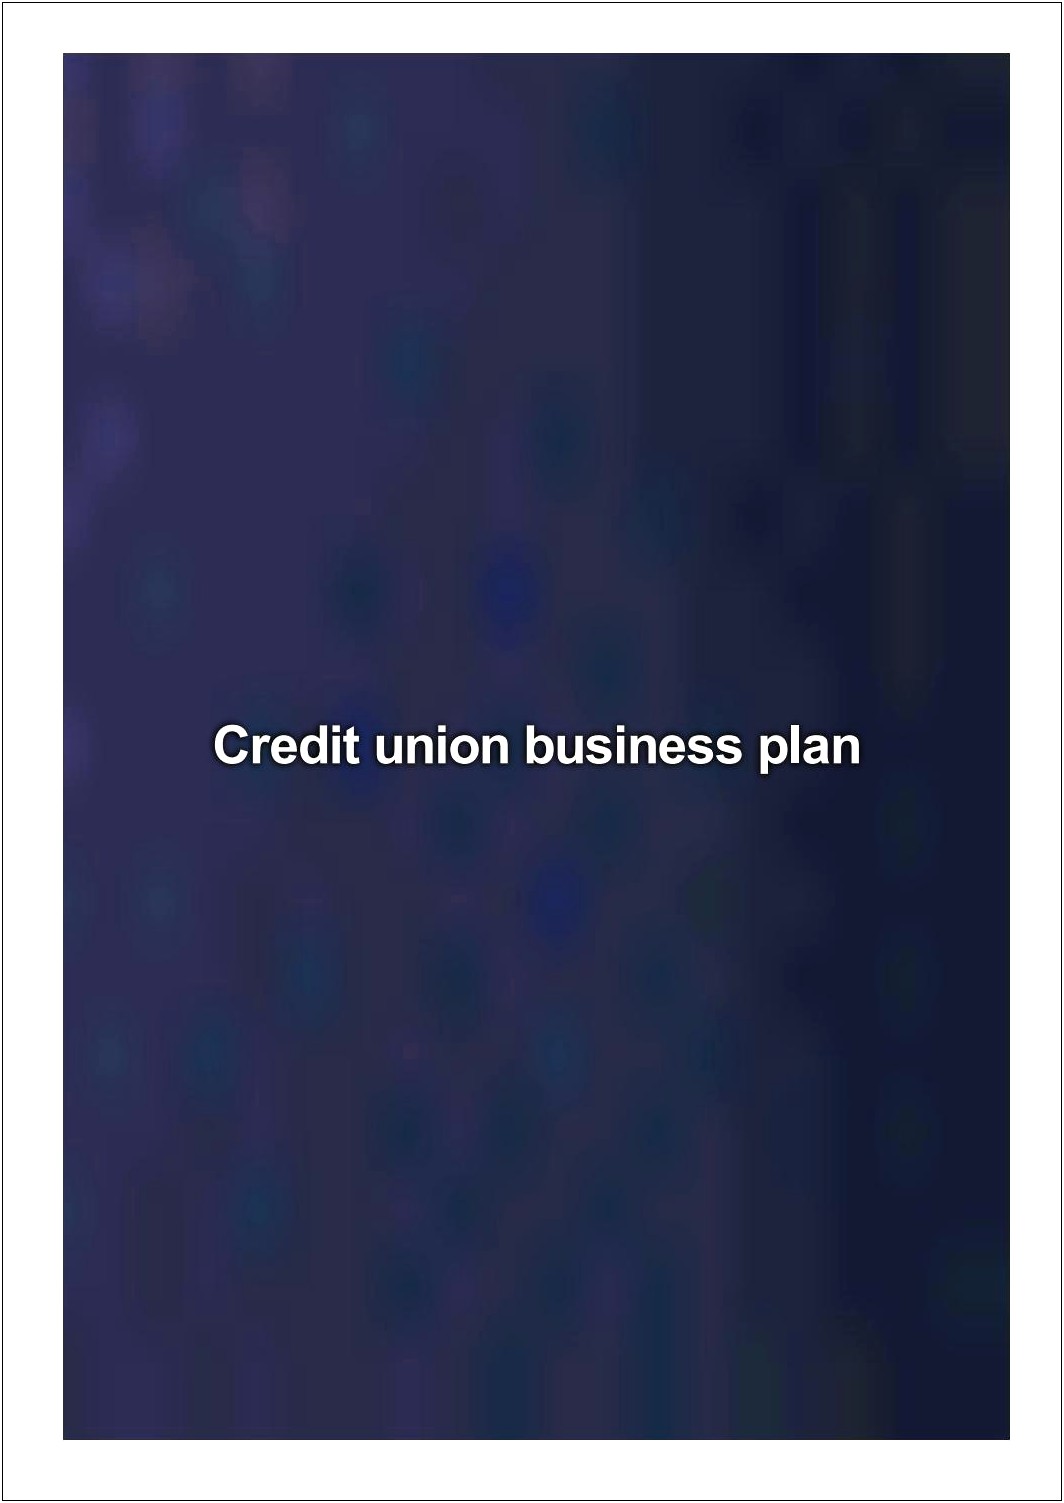 Free Credit Union Business Plan Template